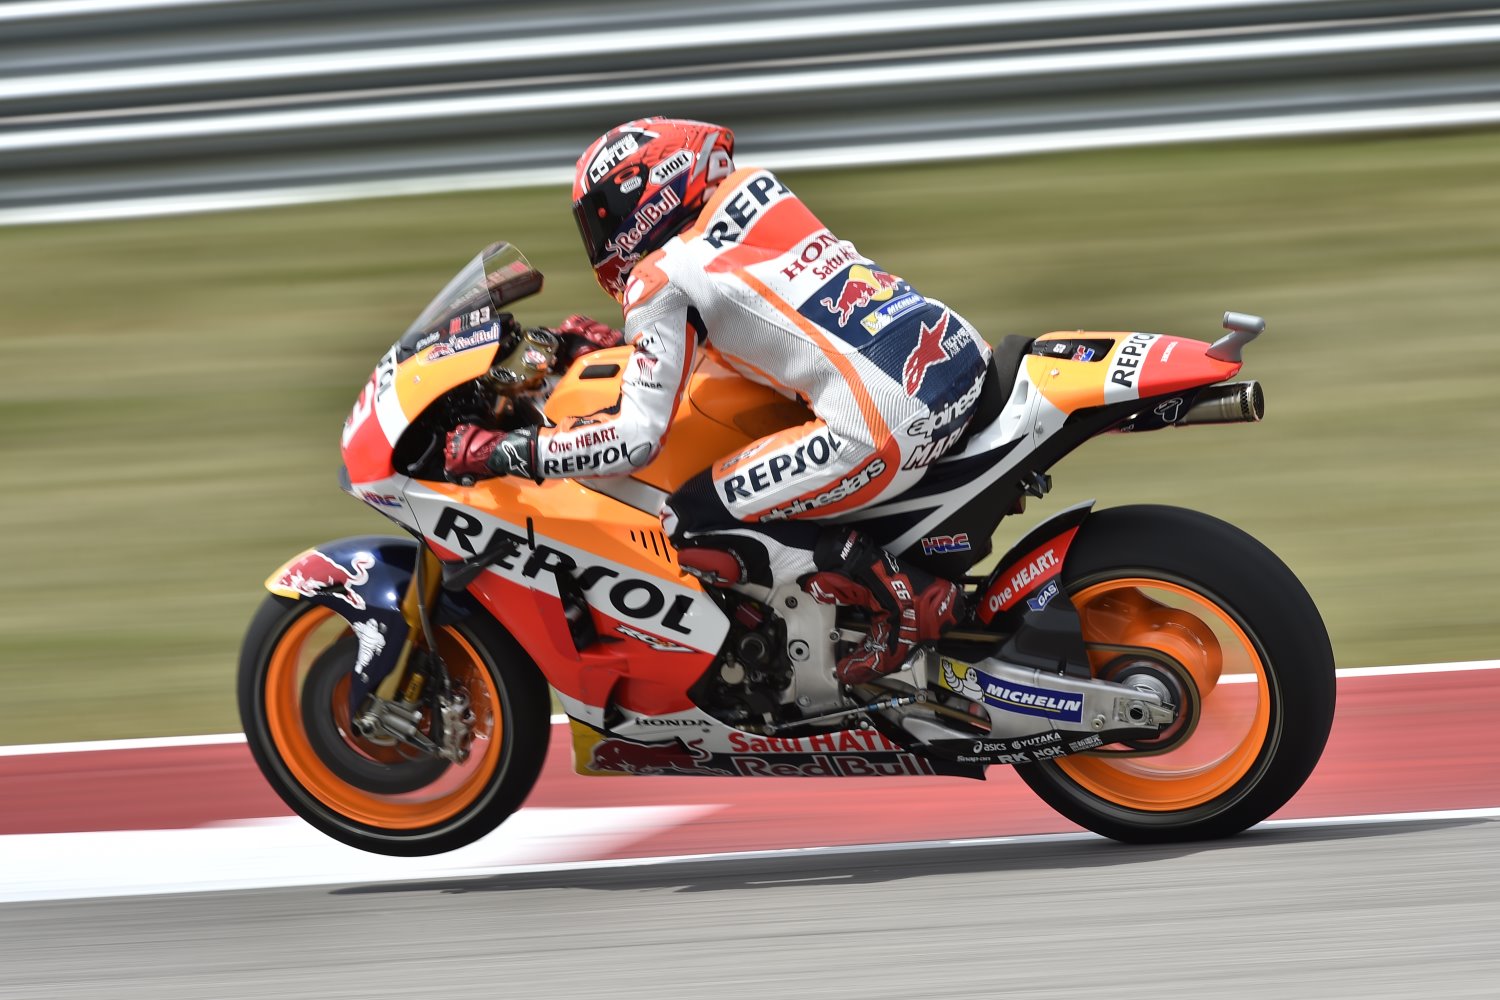 Marc Marquez powers to his 4th straight win at COTA